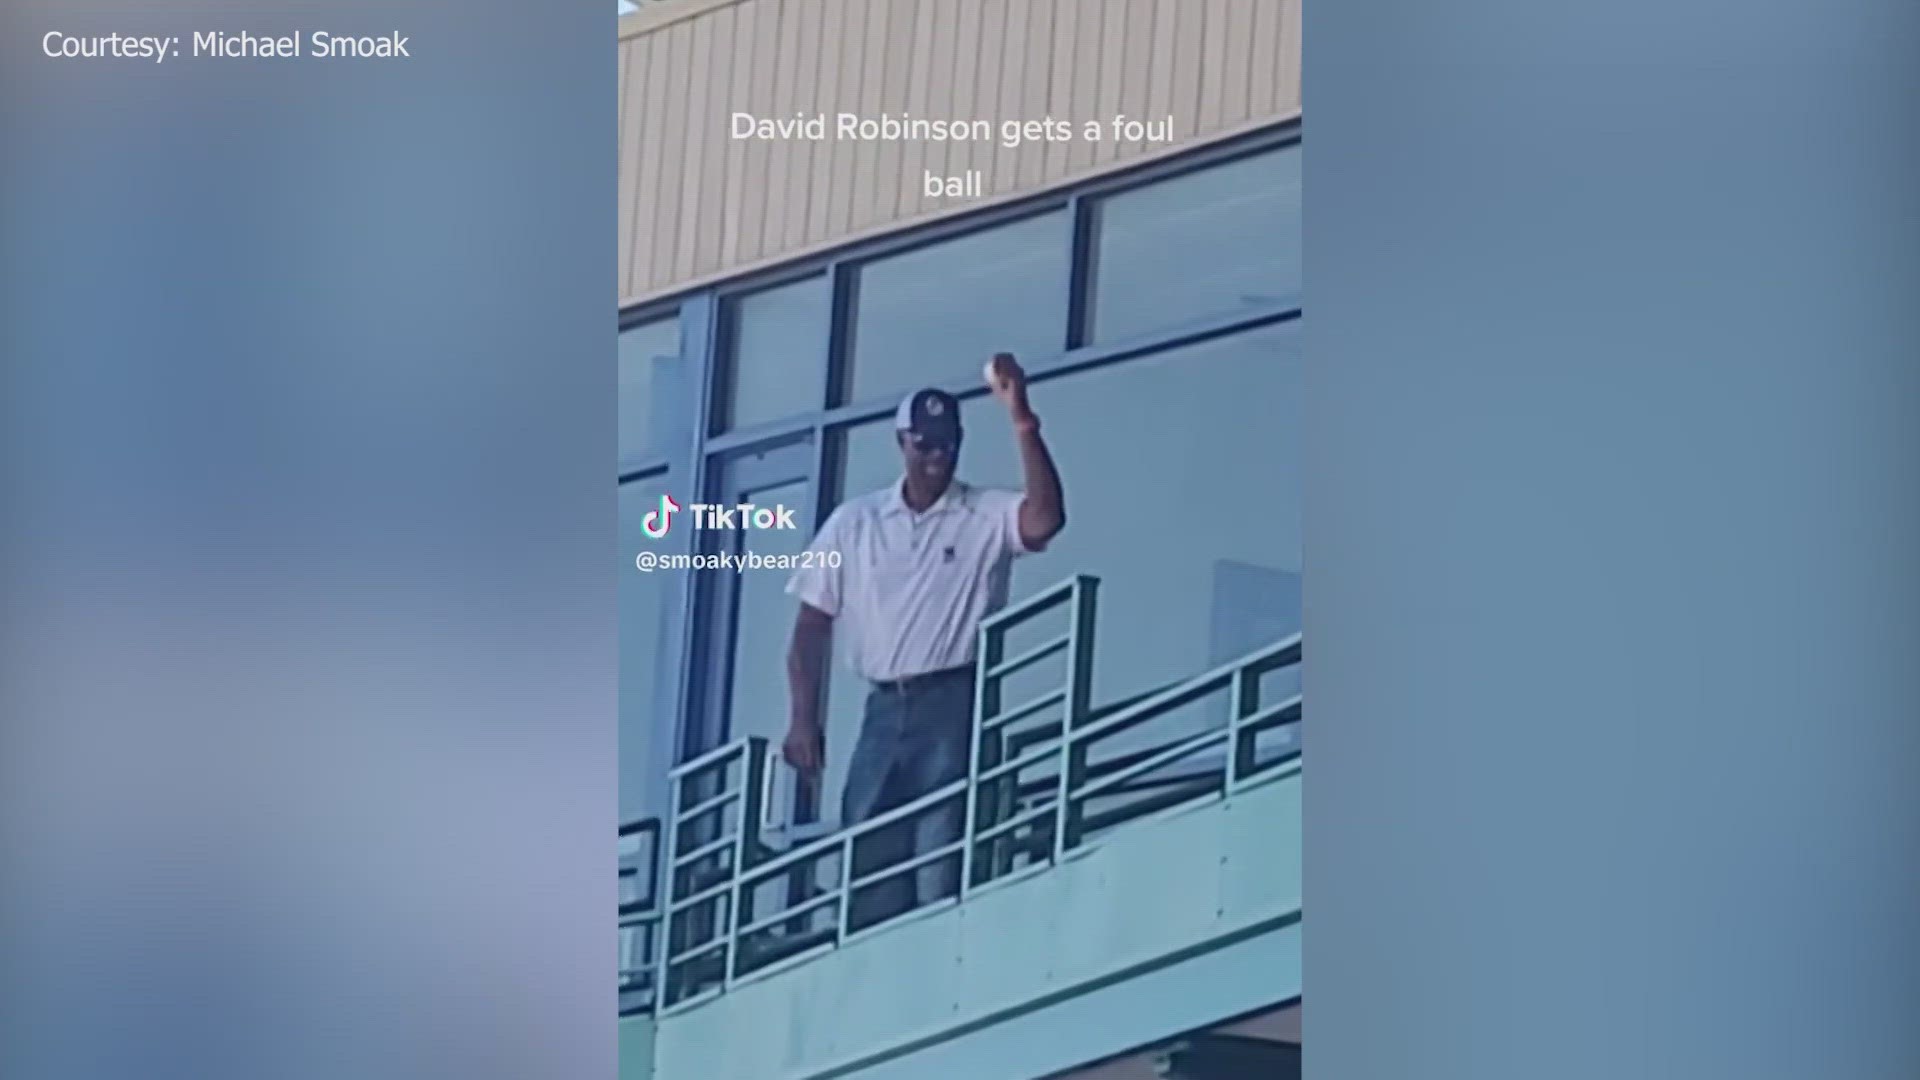 The Spurs legend is part owner of the minor league baseball team, and a viewer sent in video of the seven-footer grabbing a souvenir at Sunday's game.